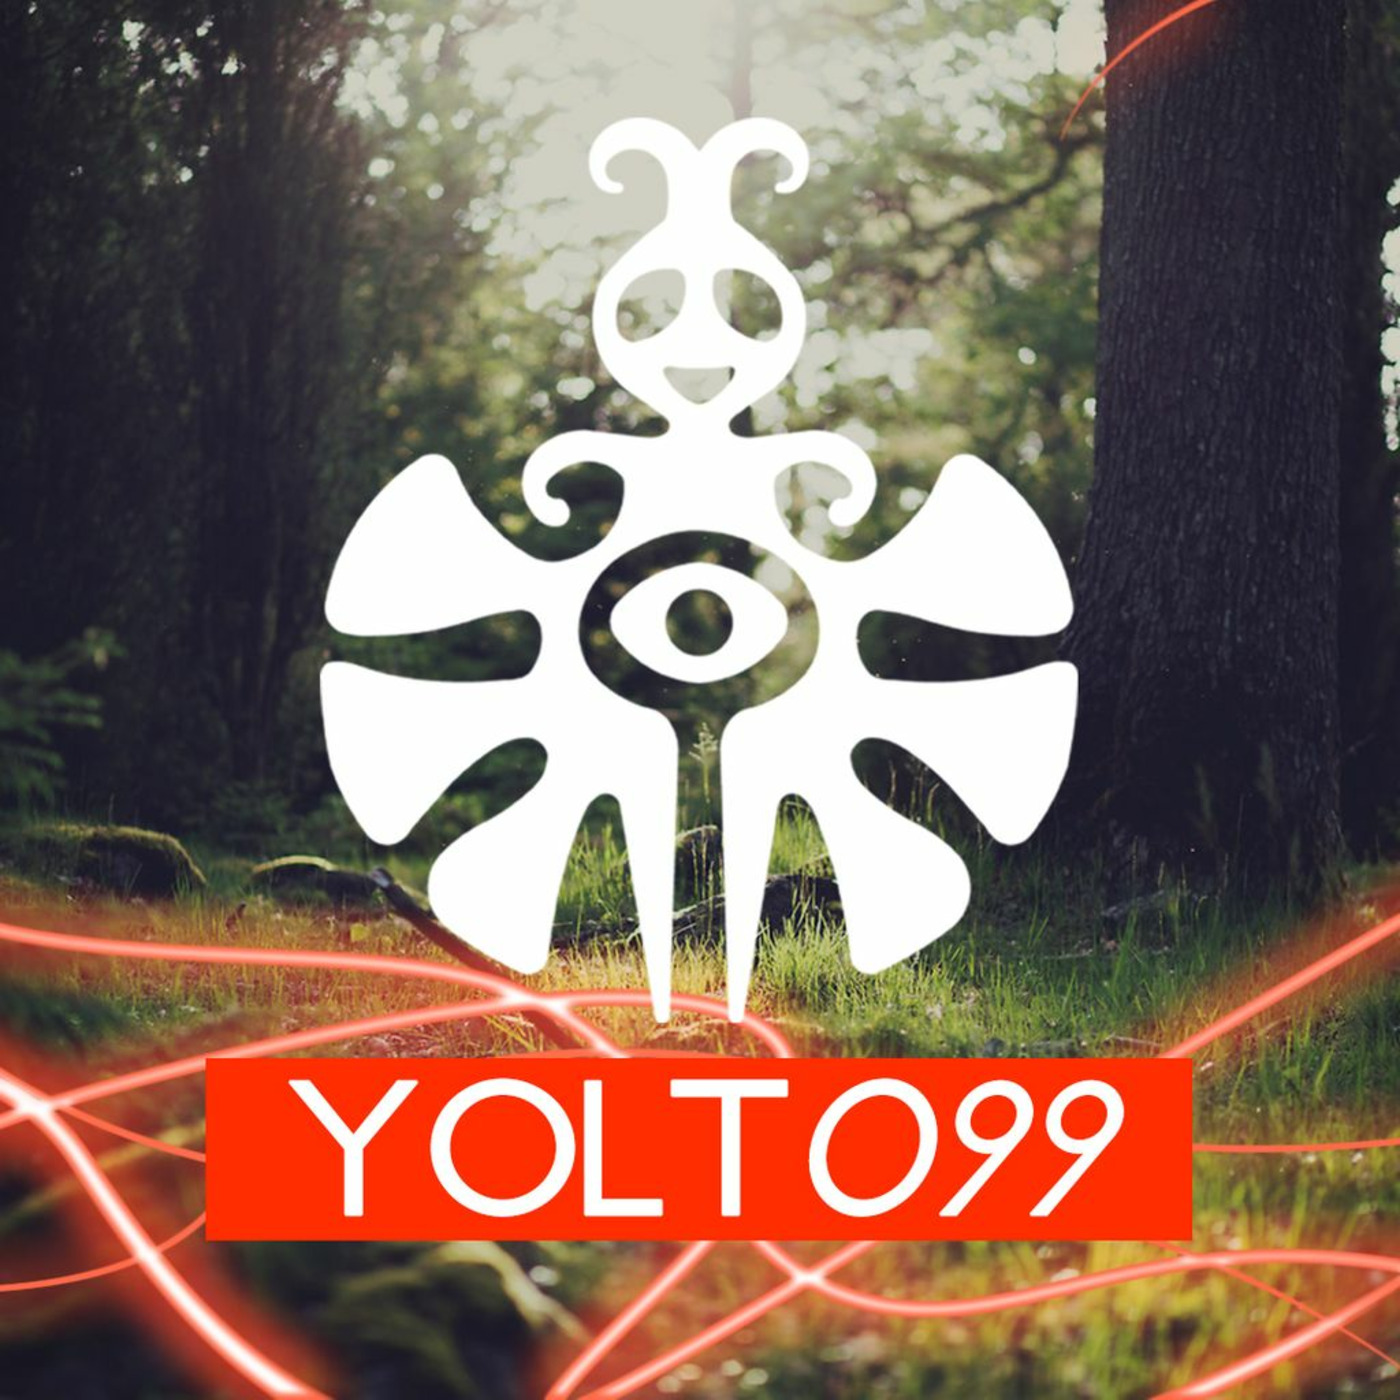 You Only Live Trance Episode 099 (#YOLT099) - Ness